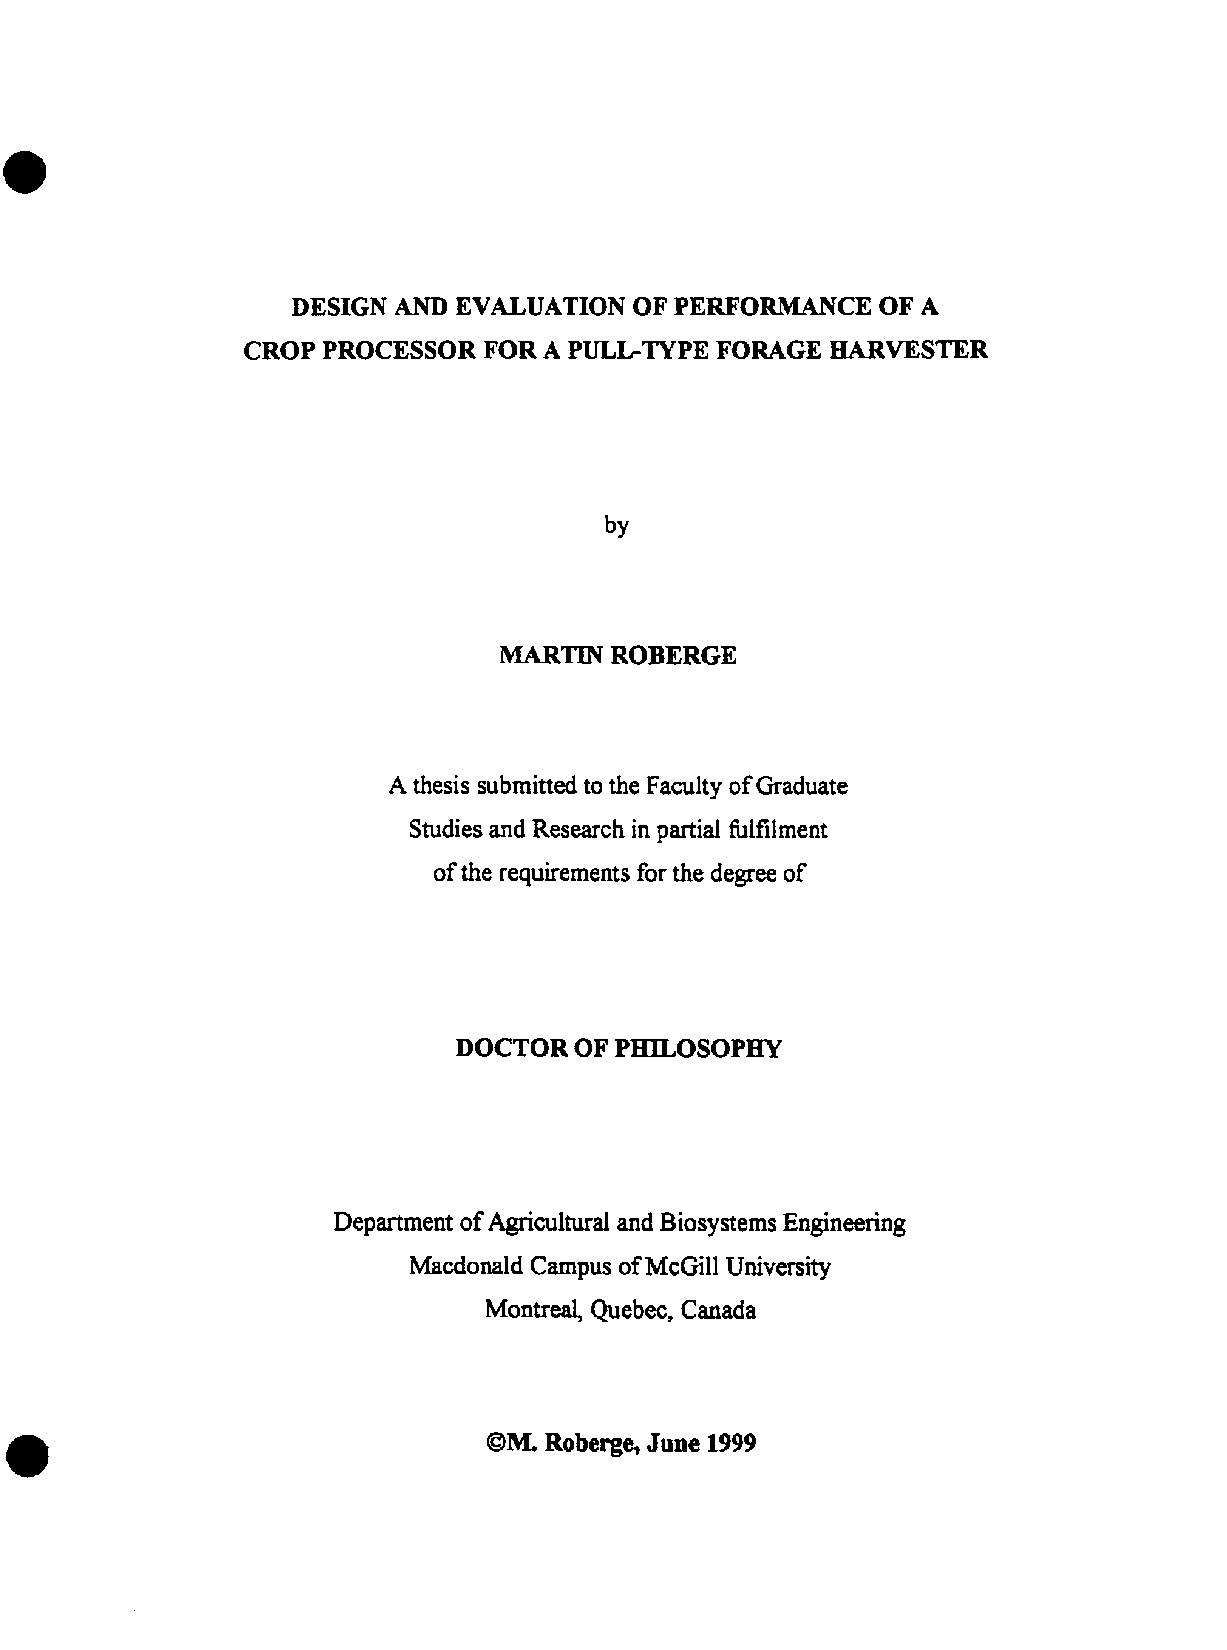 A thesis submitted to the Faculty of Graduate Department of Agricultural and Biosystems Engineering ( PDFDrive.com )_2